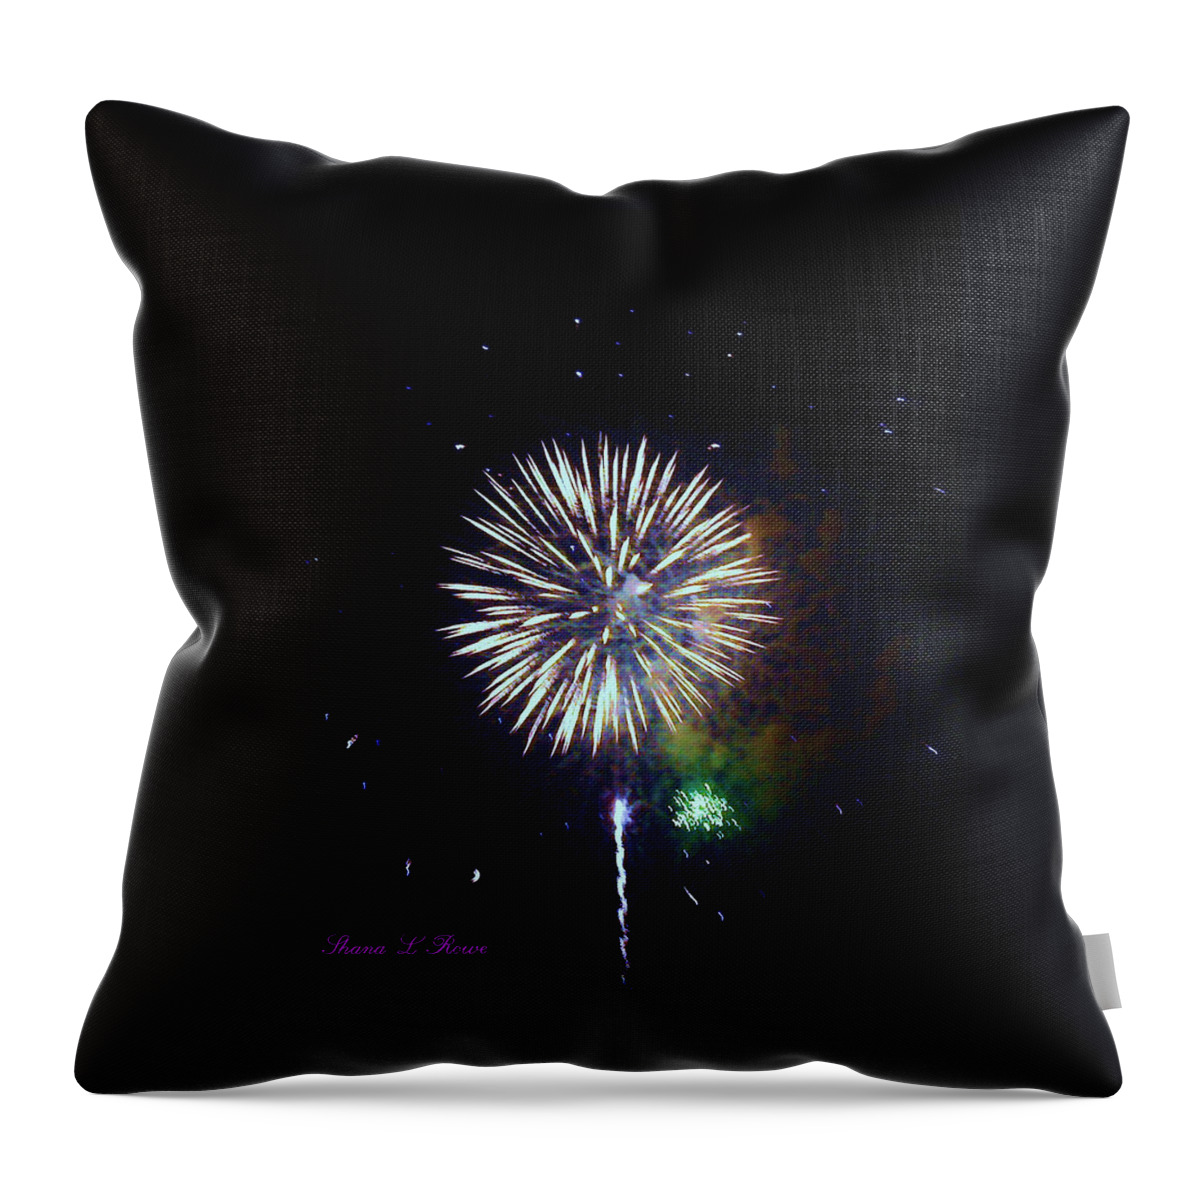 Fireworks Throw Pillow featuring the photograph Lets Celebrate by Shana Rowe Jackson